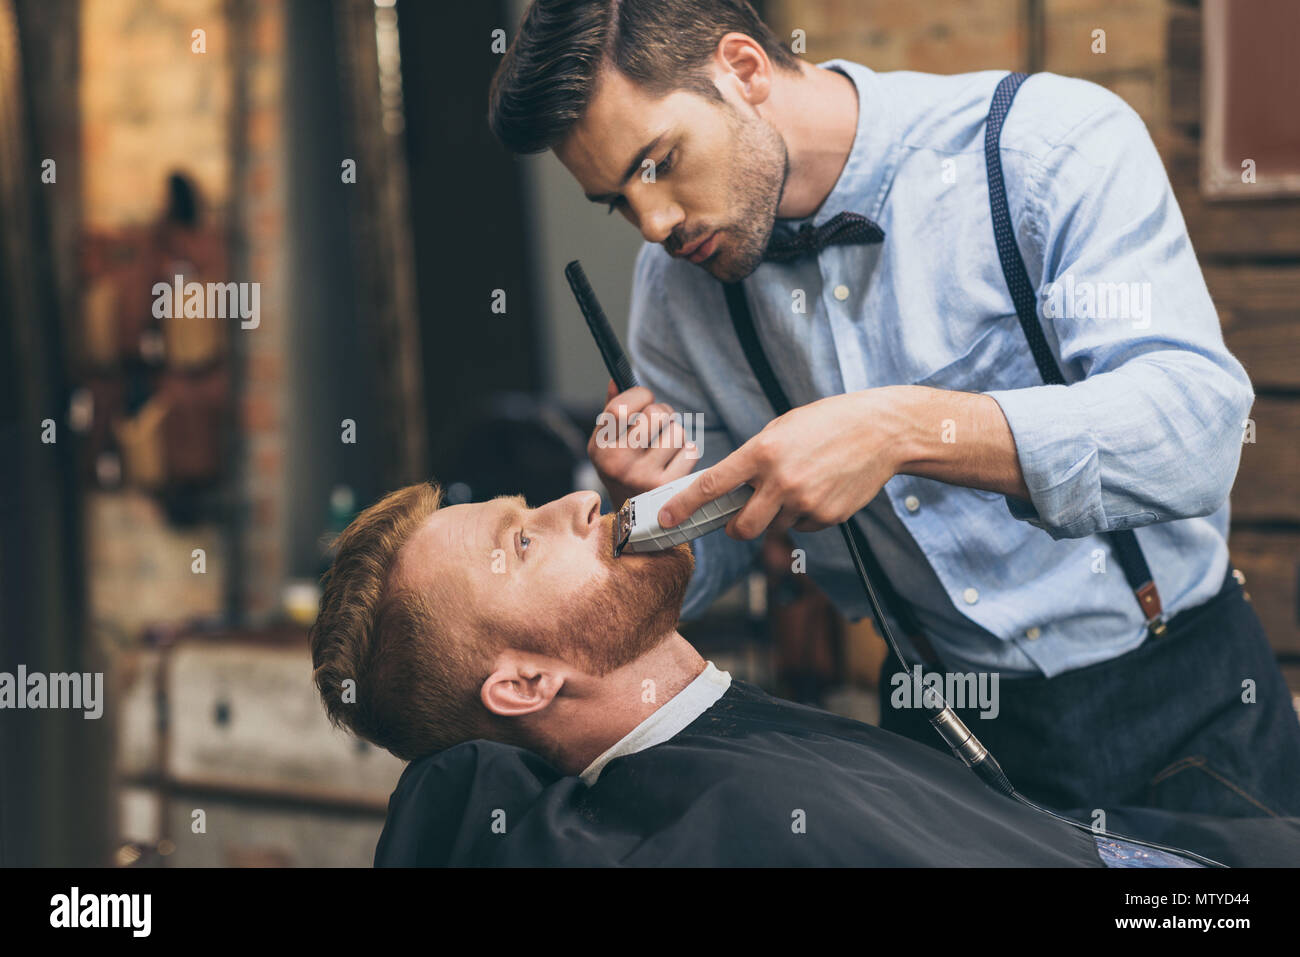 Male barber trimming customers beard in barber shop Stock Photo